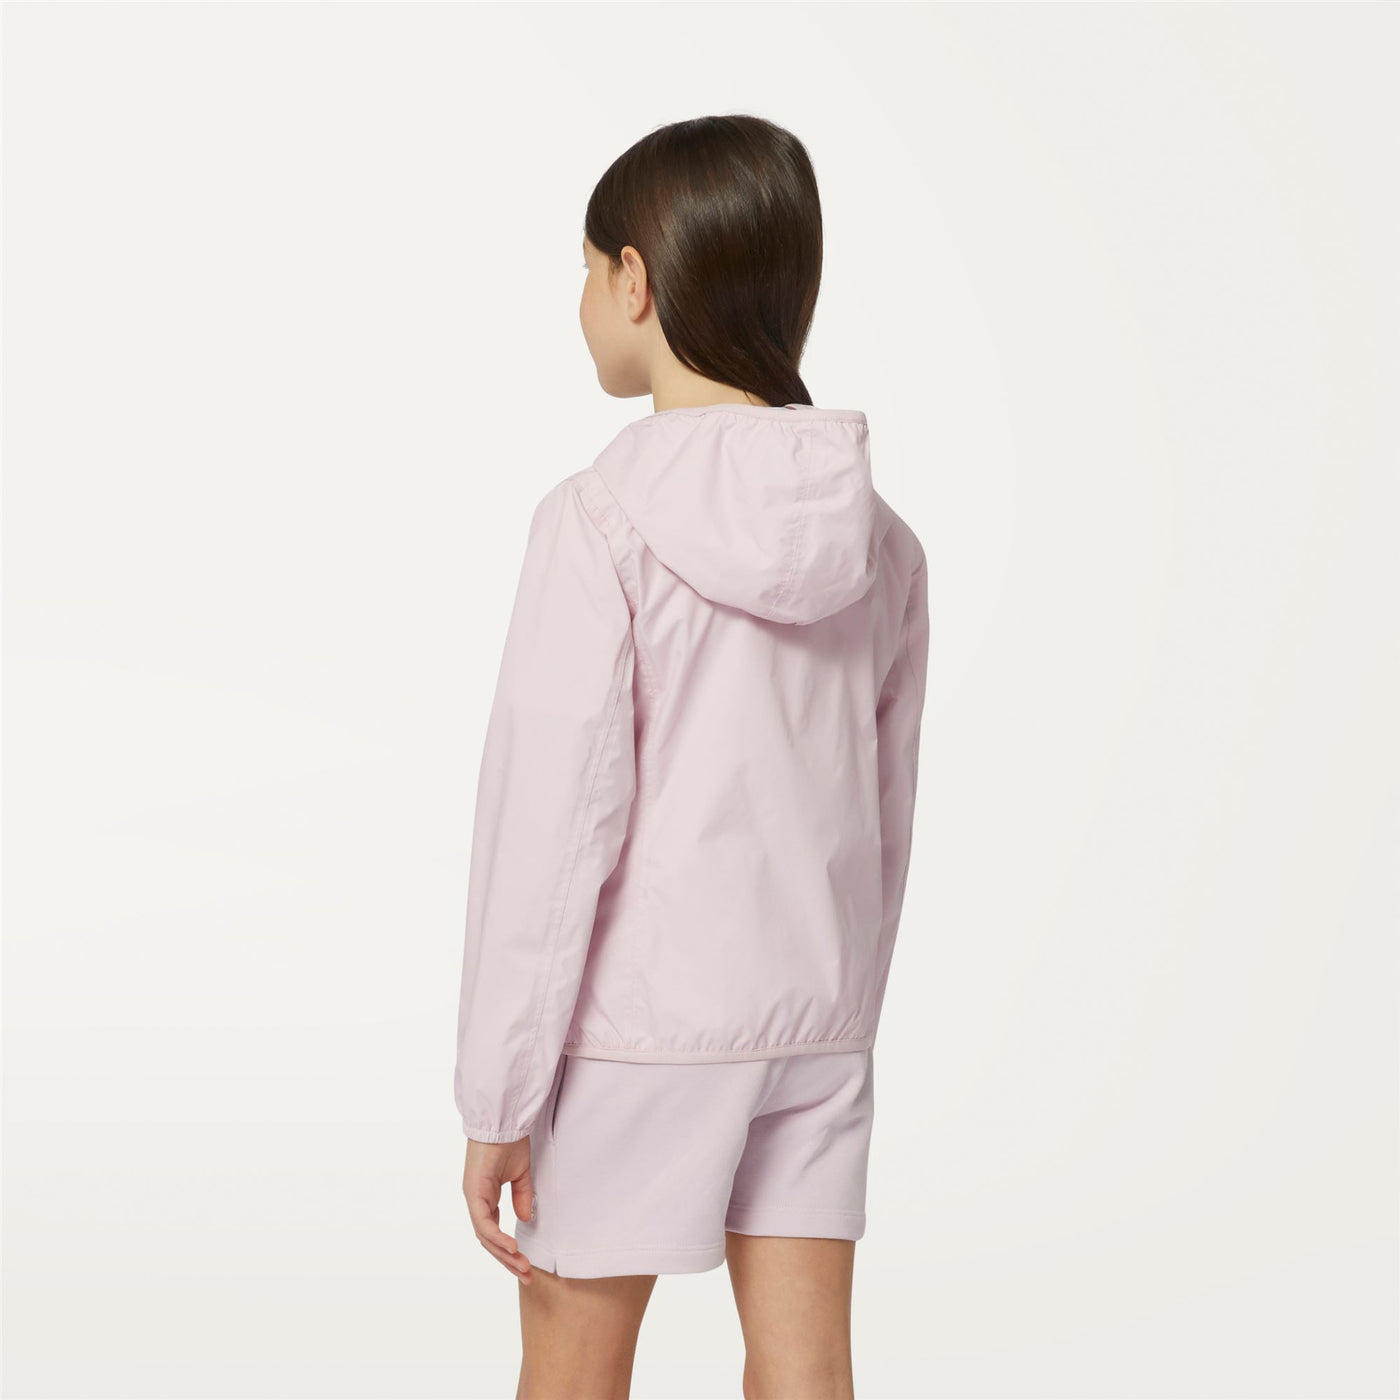 Jackets Girl P. LILY PLUS.2 DOUBLE Short PINK ROSE - WHITE Dressed Front Double		